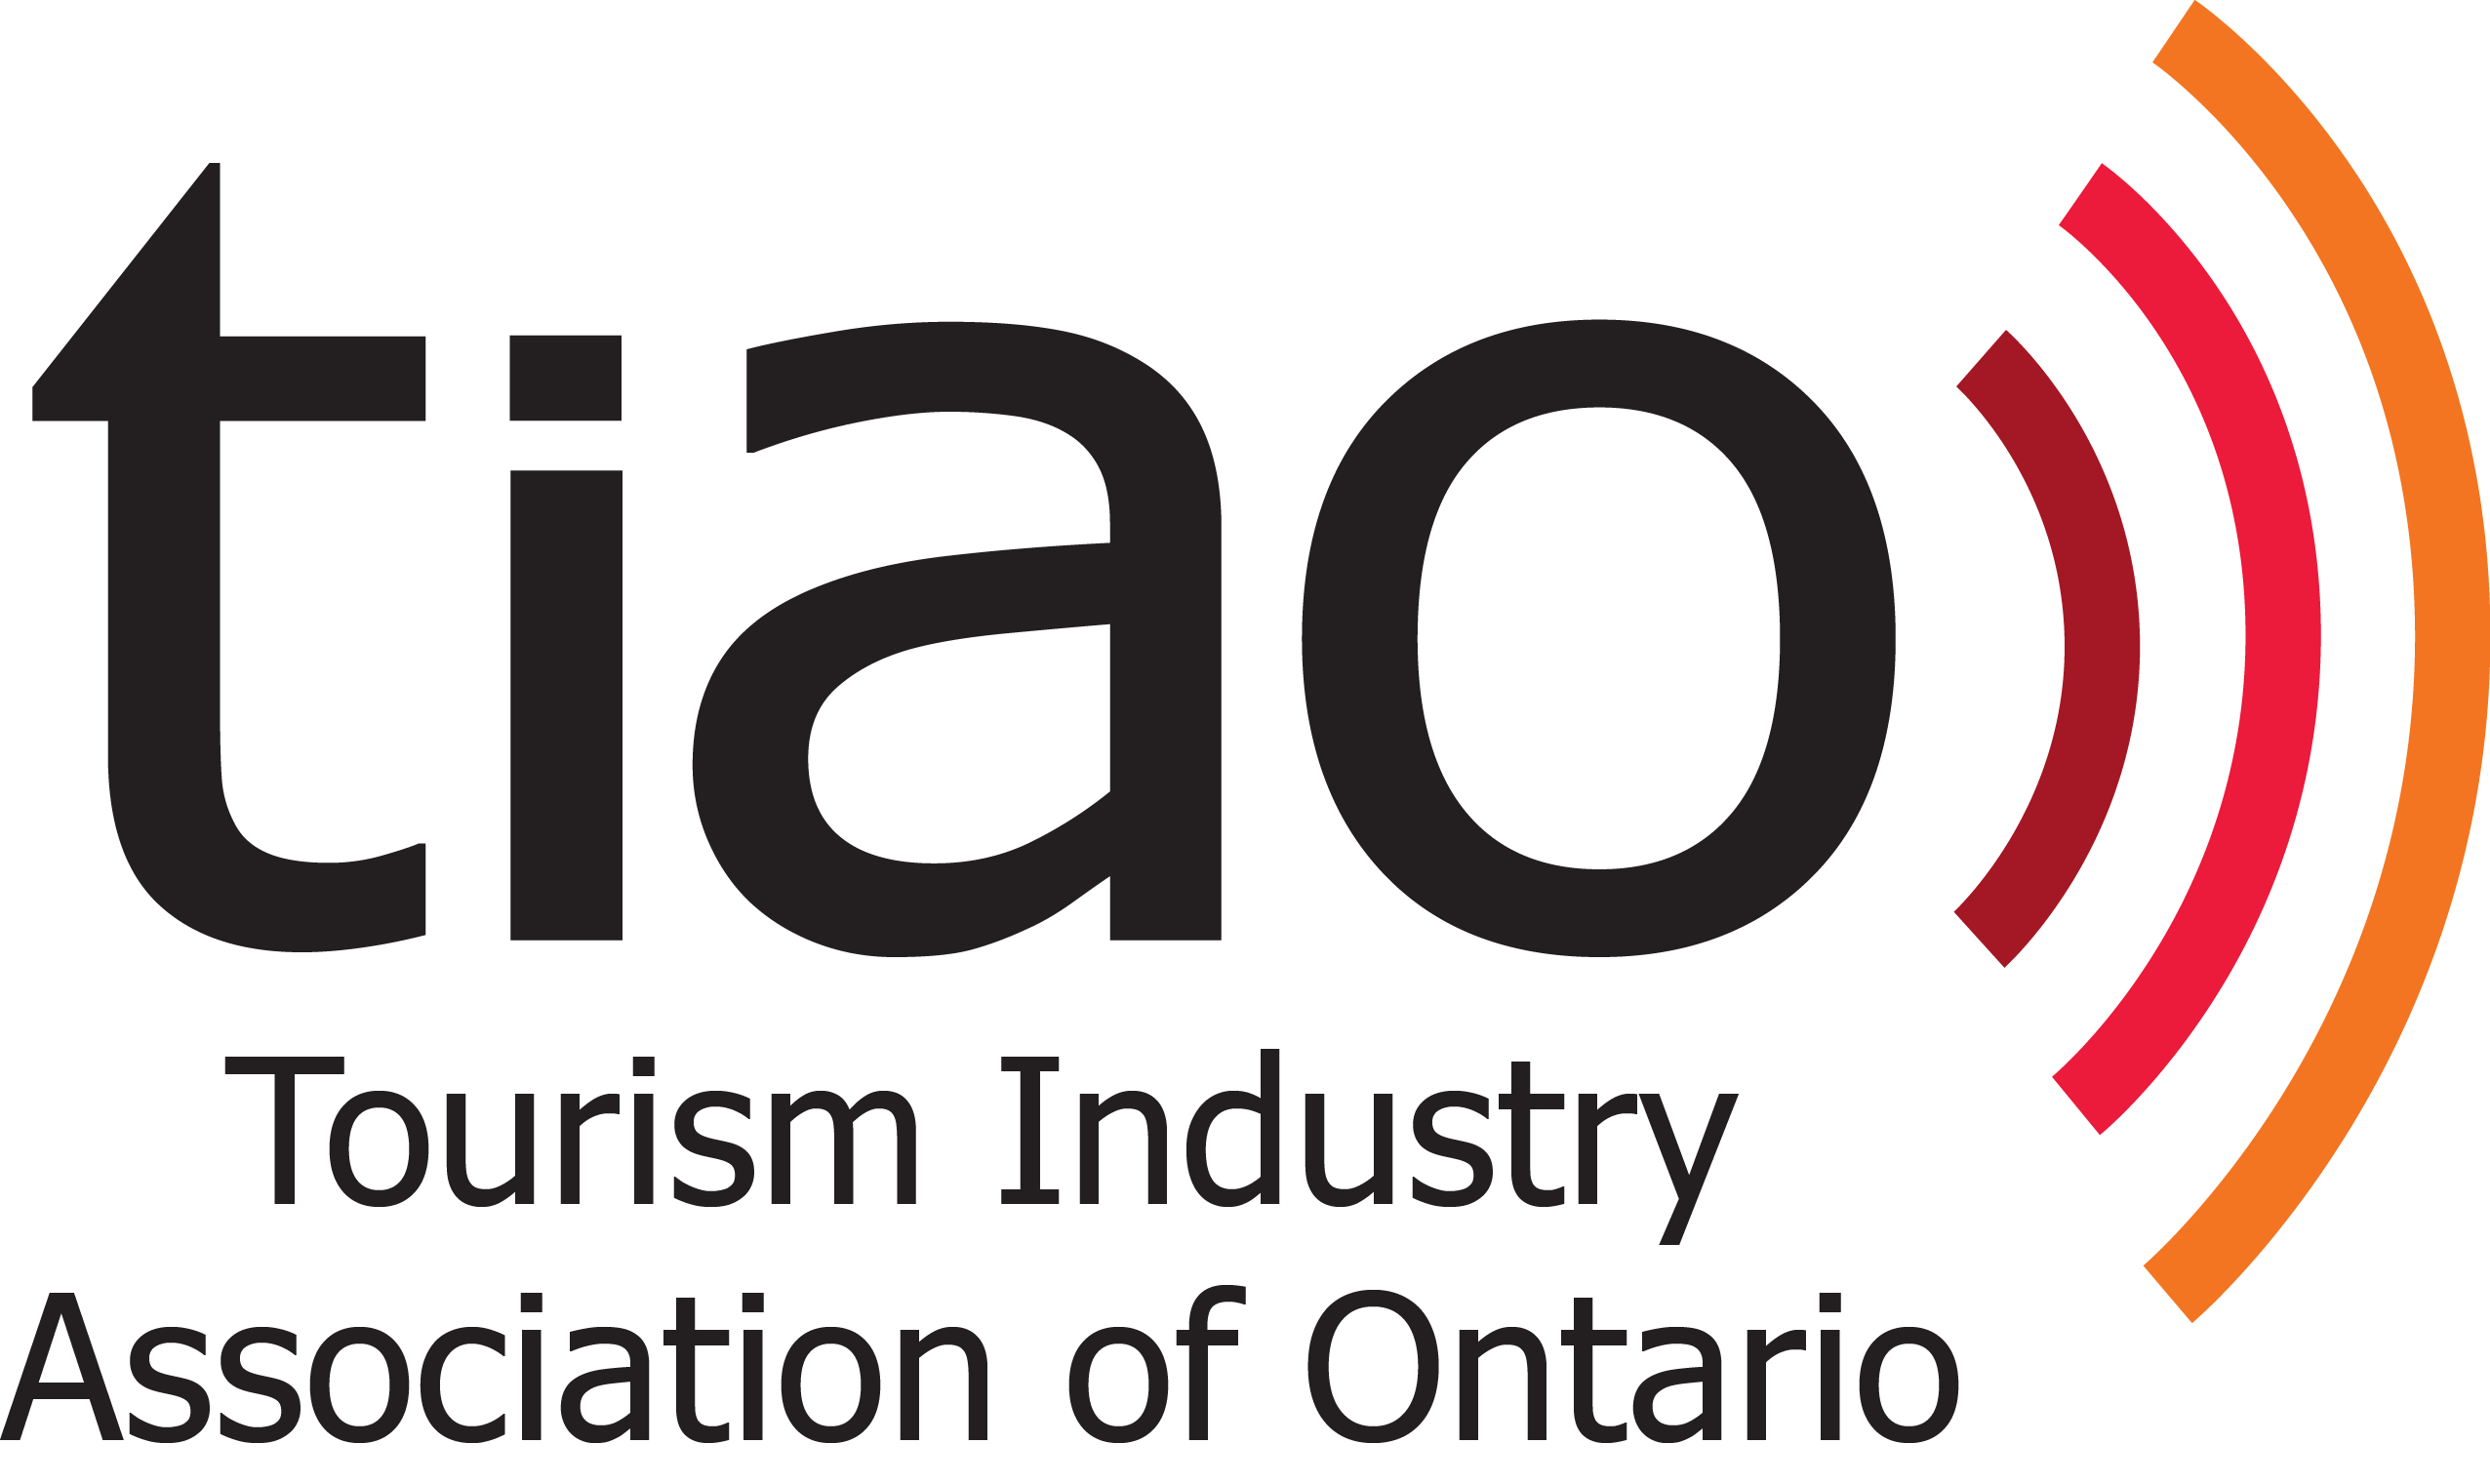 The County of Prince Edward / Tourism Industry Association of Ontario